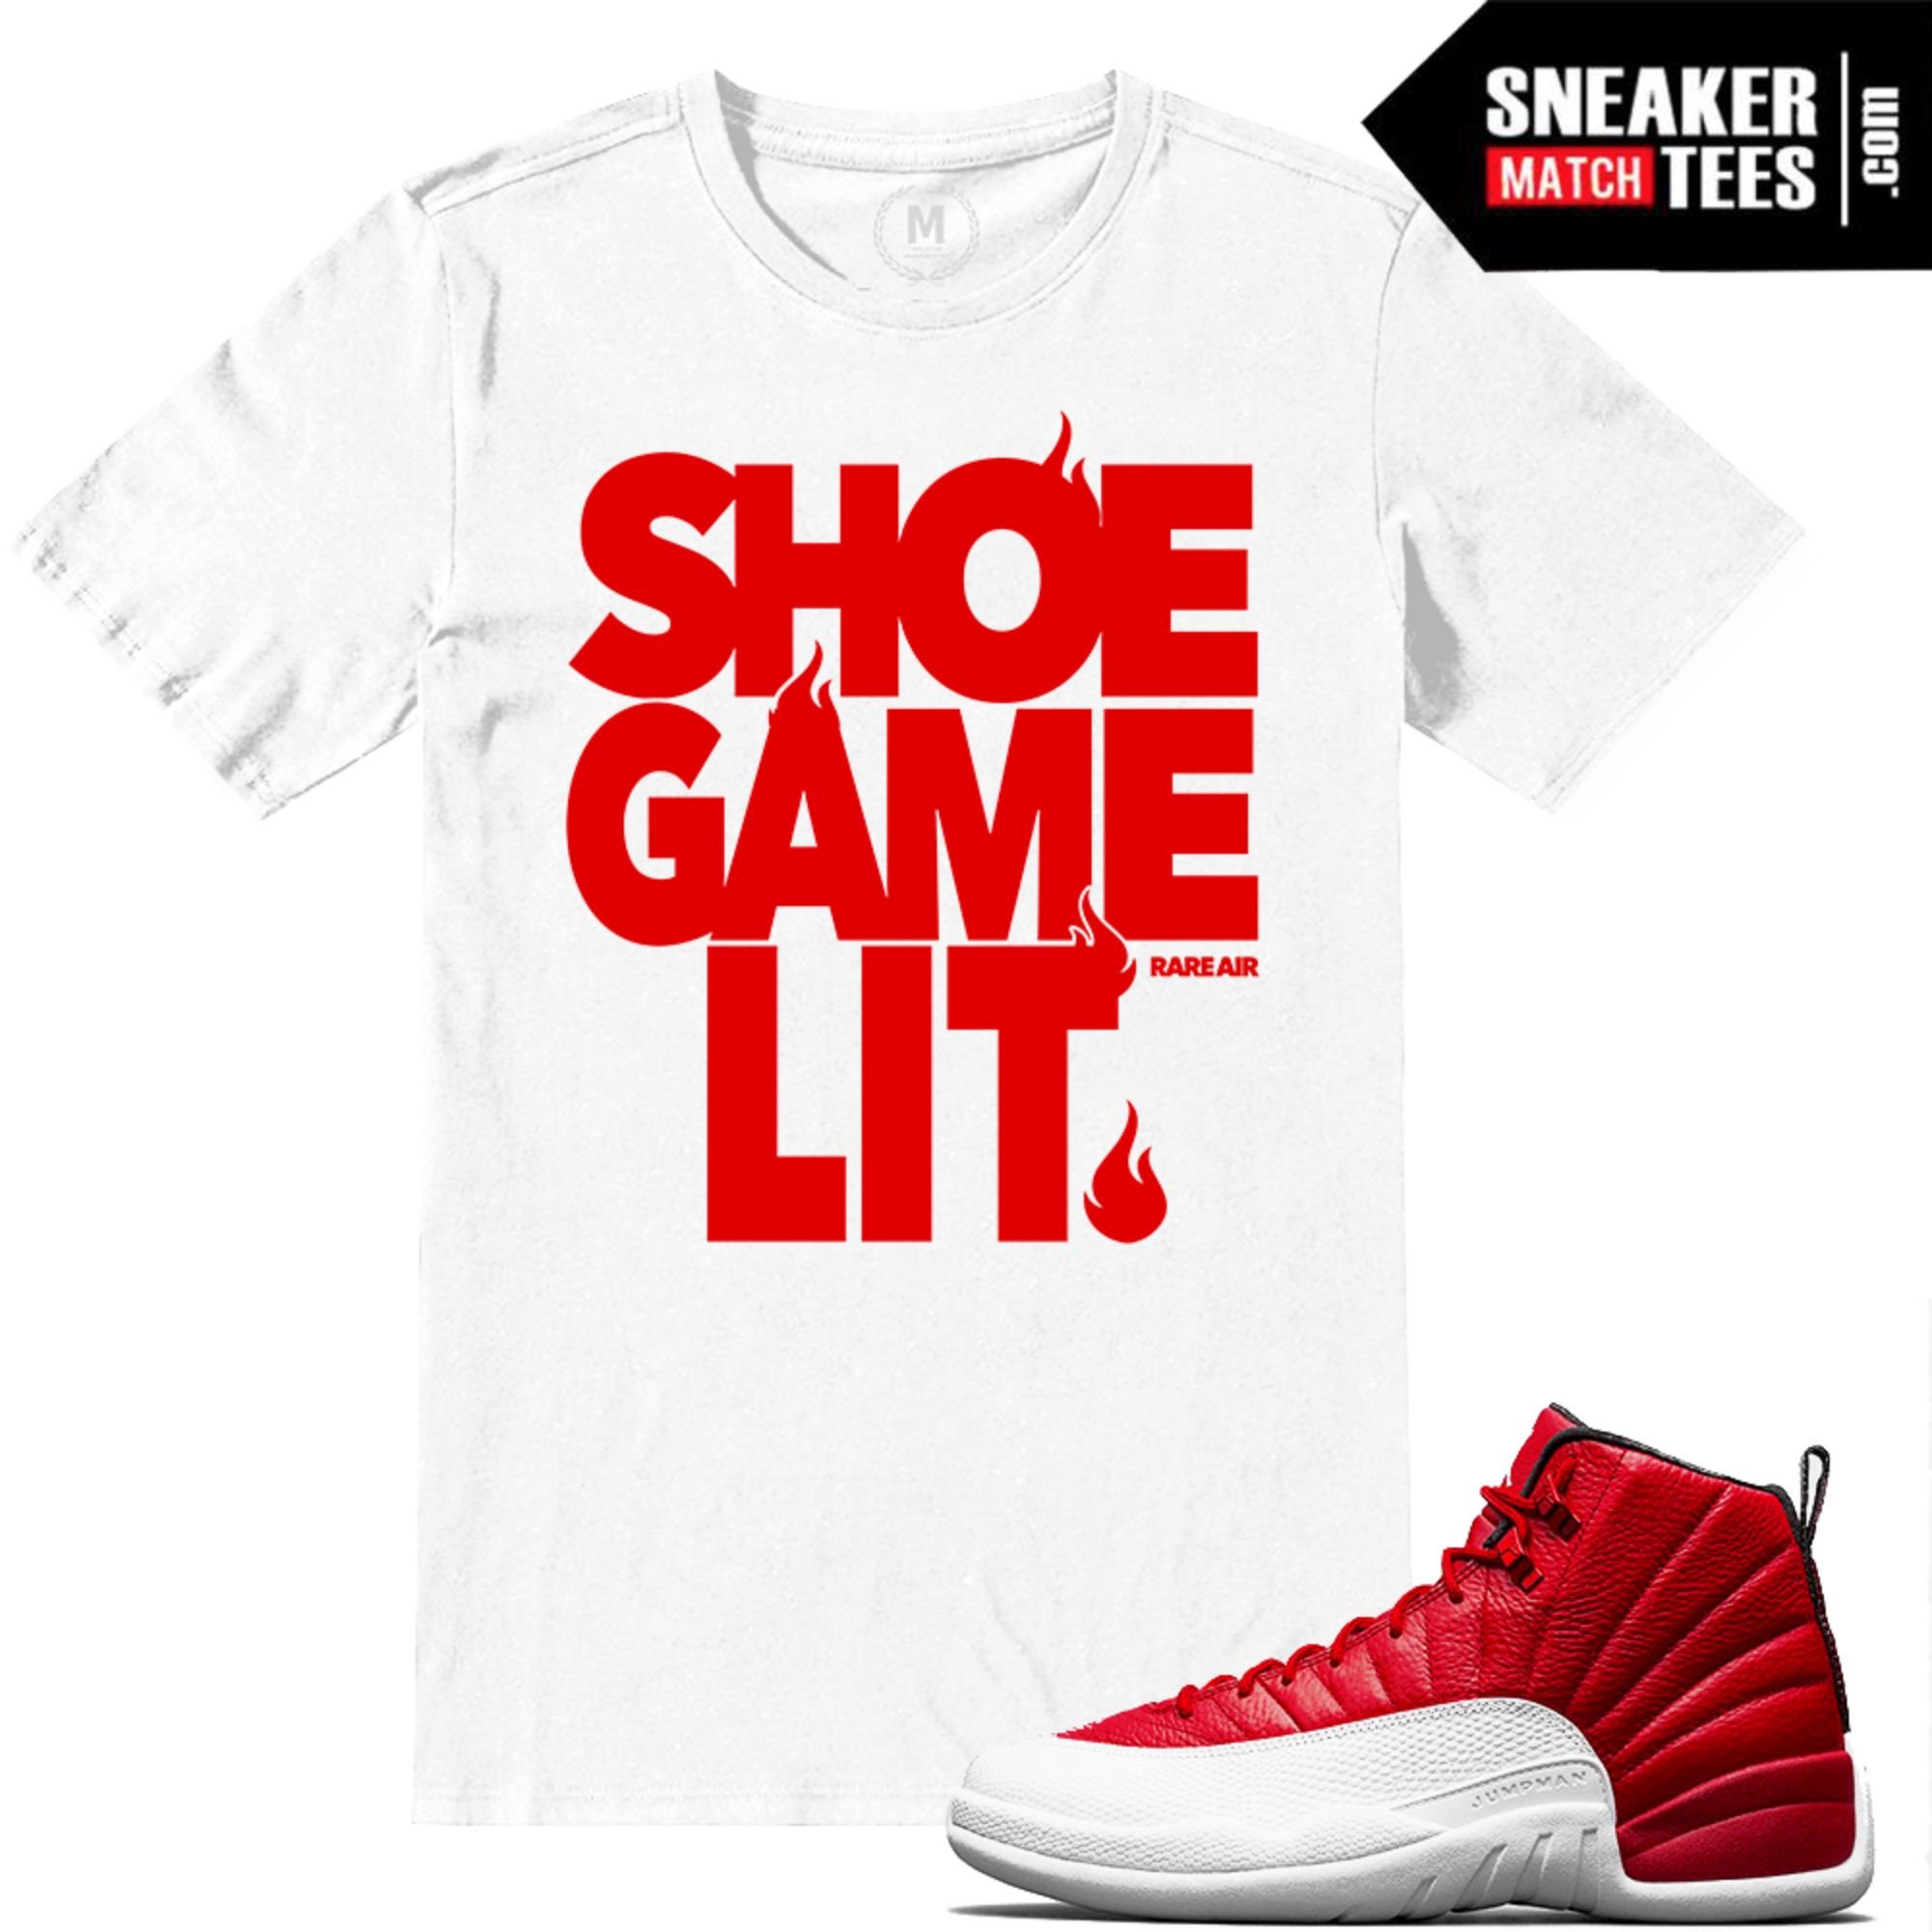 jordan 12 gym red outfit